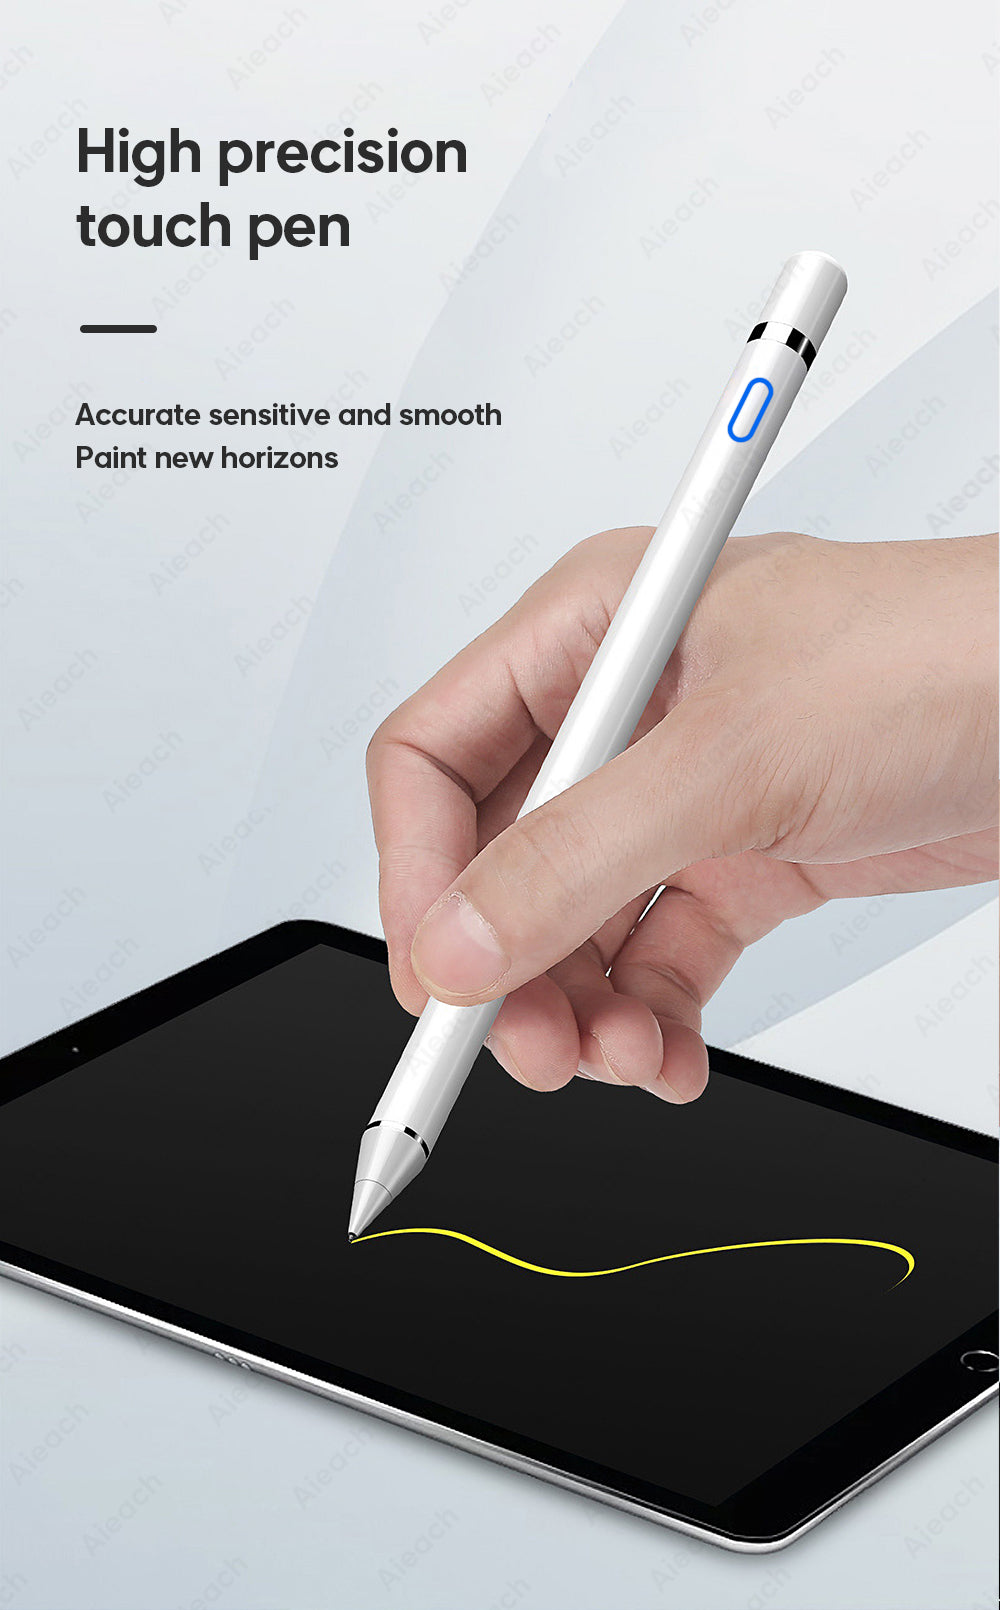 For Apple Pencil iPad Pro Pen Touch Pen For Tablet iPad Air 5 Samsung Xiaomi Lenovo Tablete Pen Stylus For Mobile Phones Android